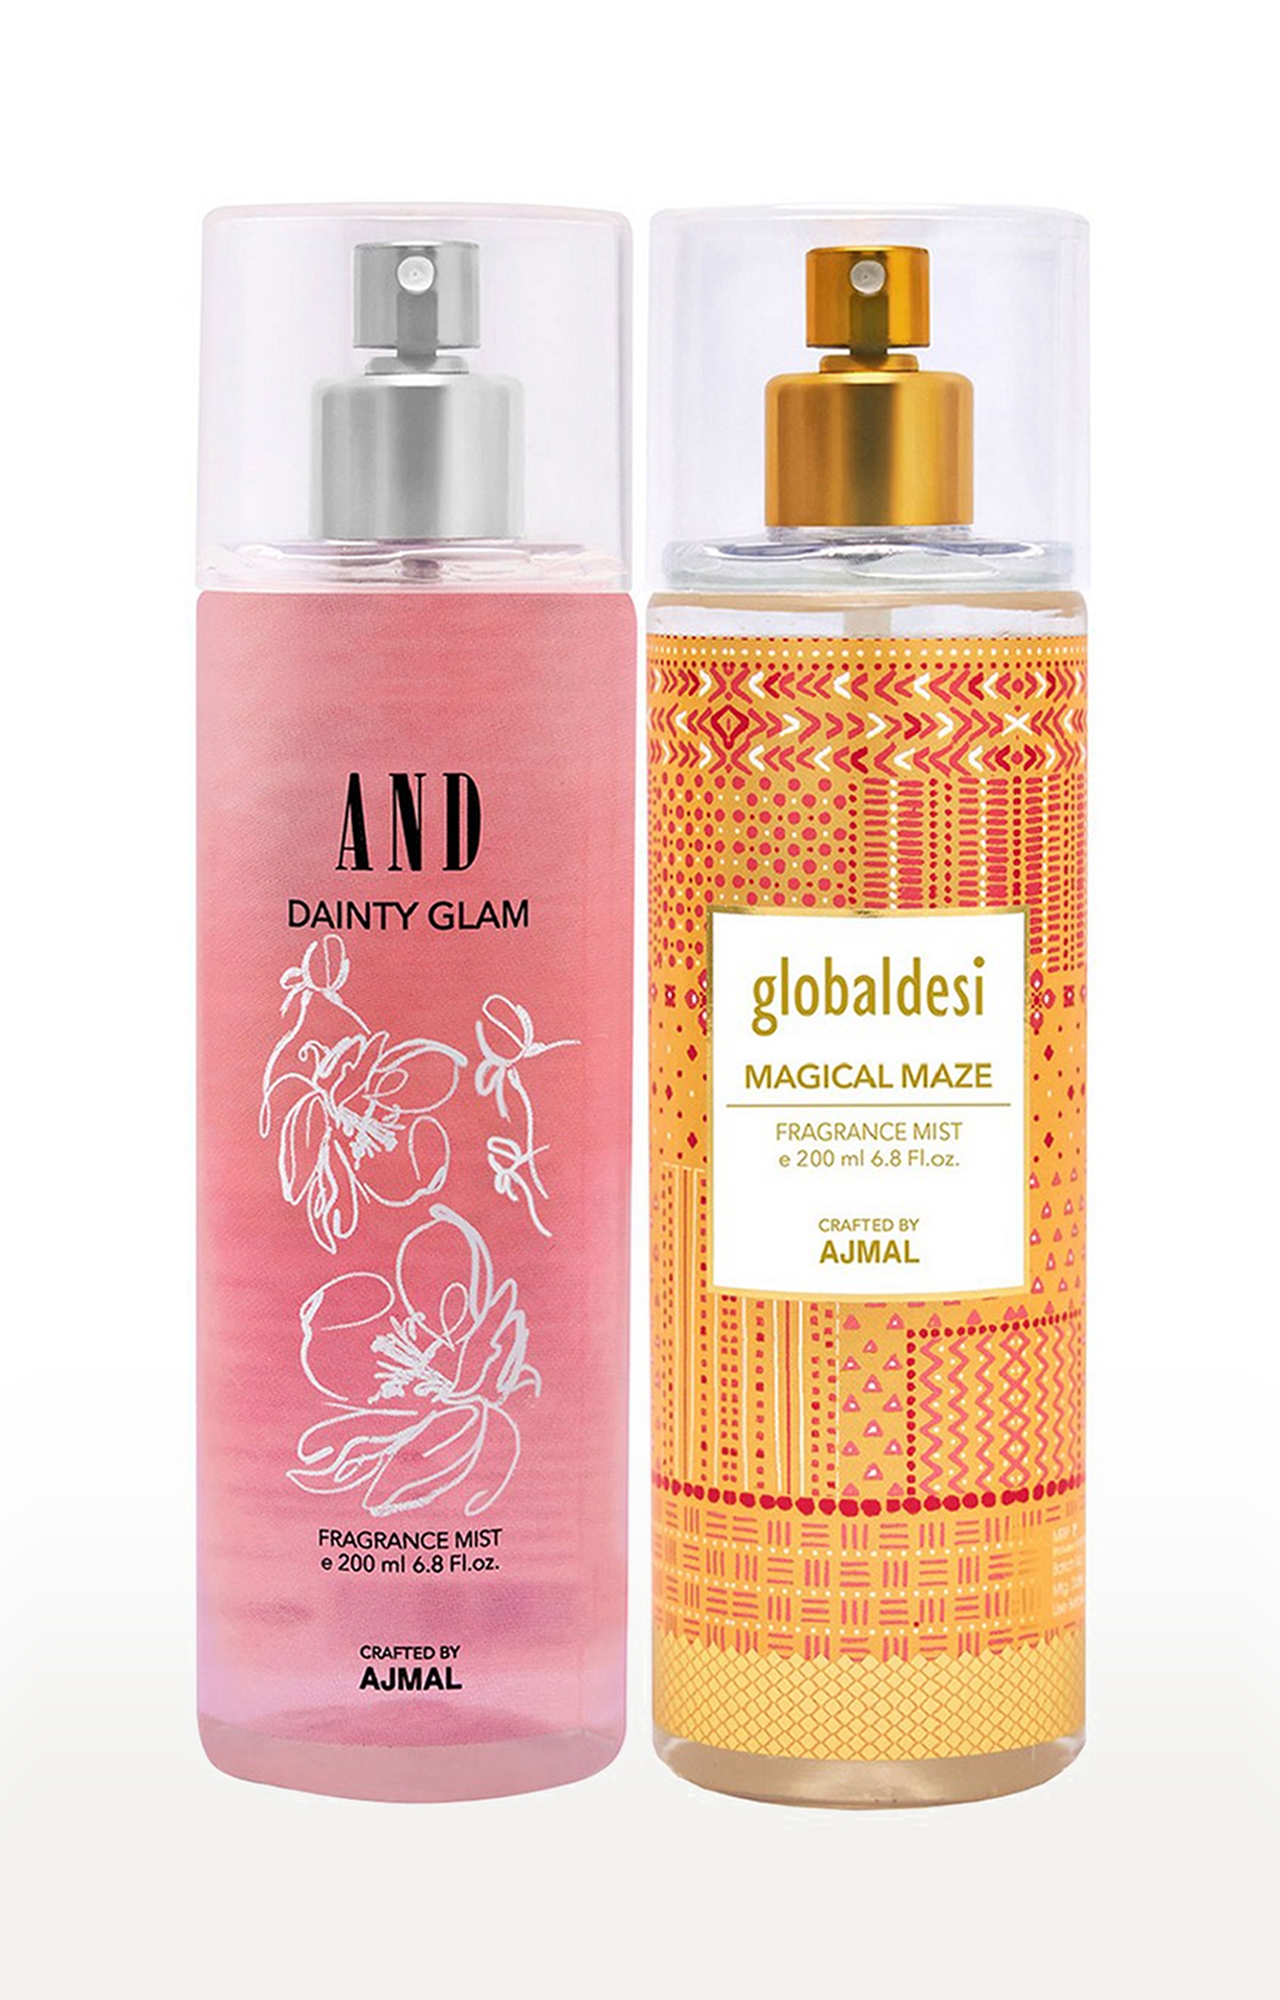 AND Dainty Glam Body Mist 200ML & Global Desi Magical Maze Body Mist 200ML Long Lasting Scent Spray Gift For Women Perfume FREE